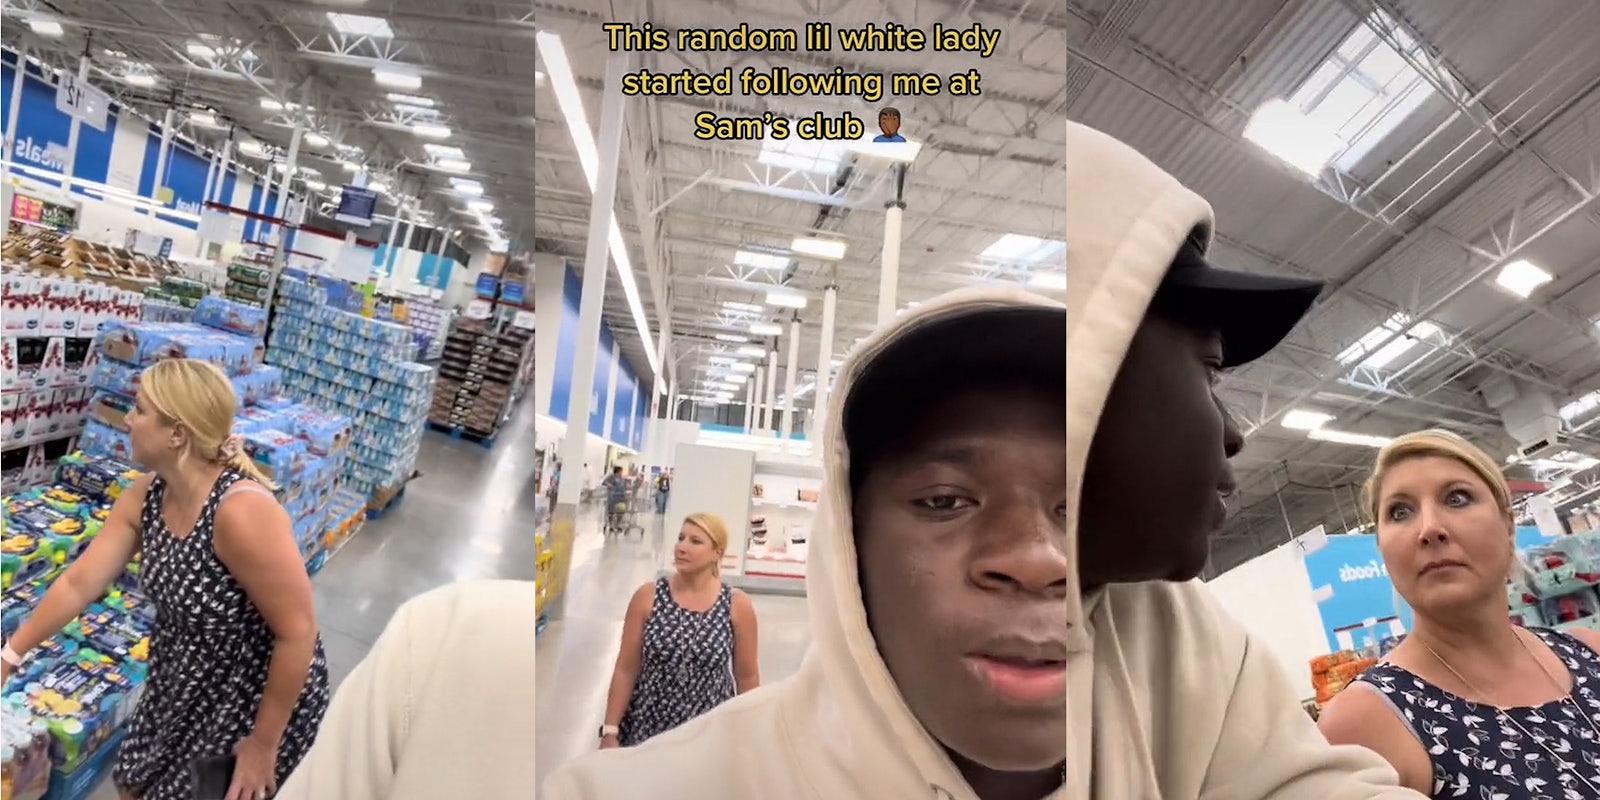 woman crouched at store grabbing drinks (l) woman behind man in store caption 'This random lil white lady started following me at Sam's club' (c) Man turned to woman speaking woman making sour face in store (r)